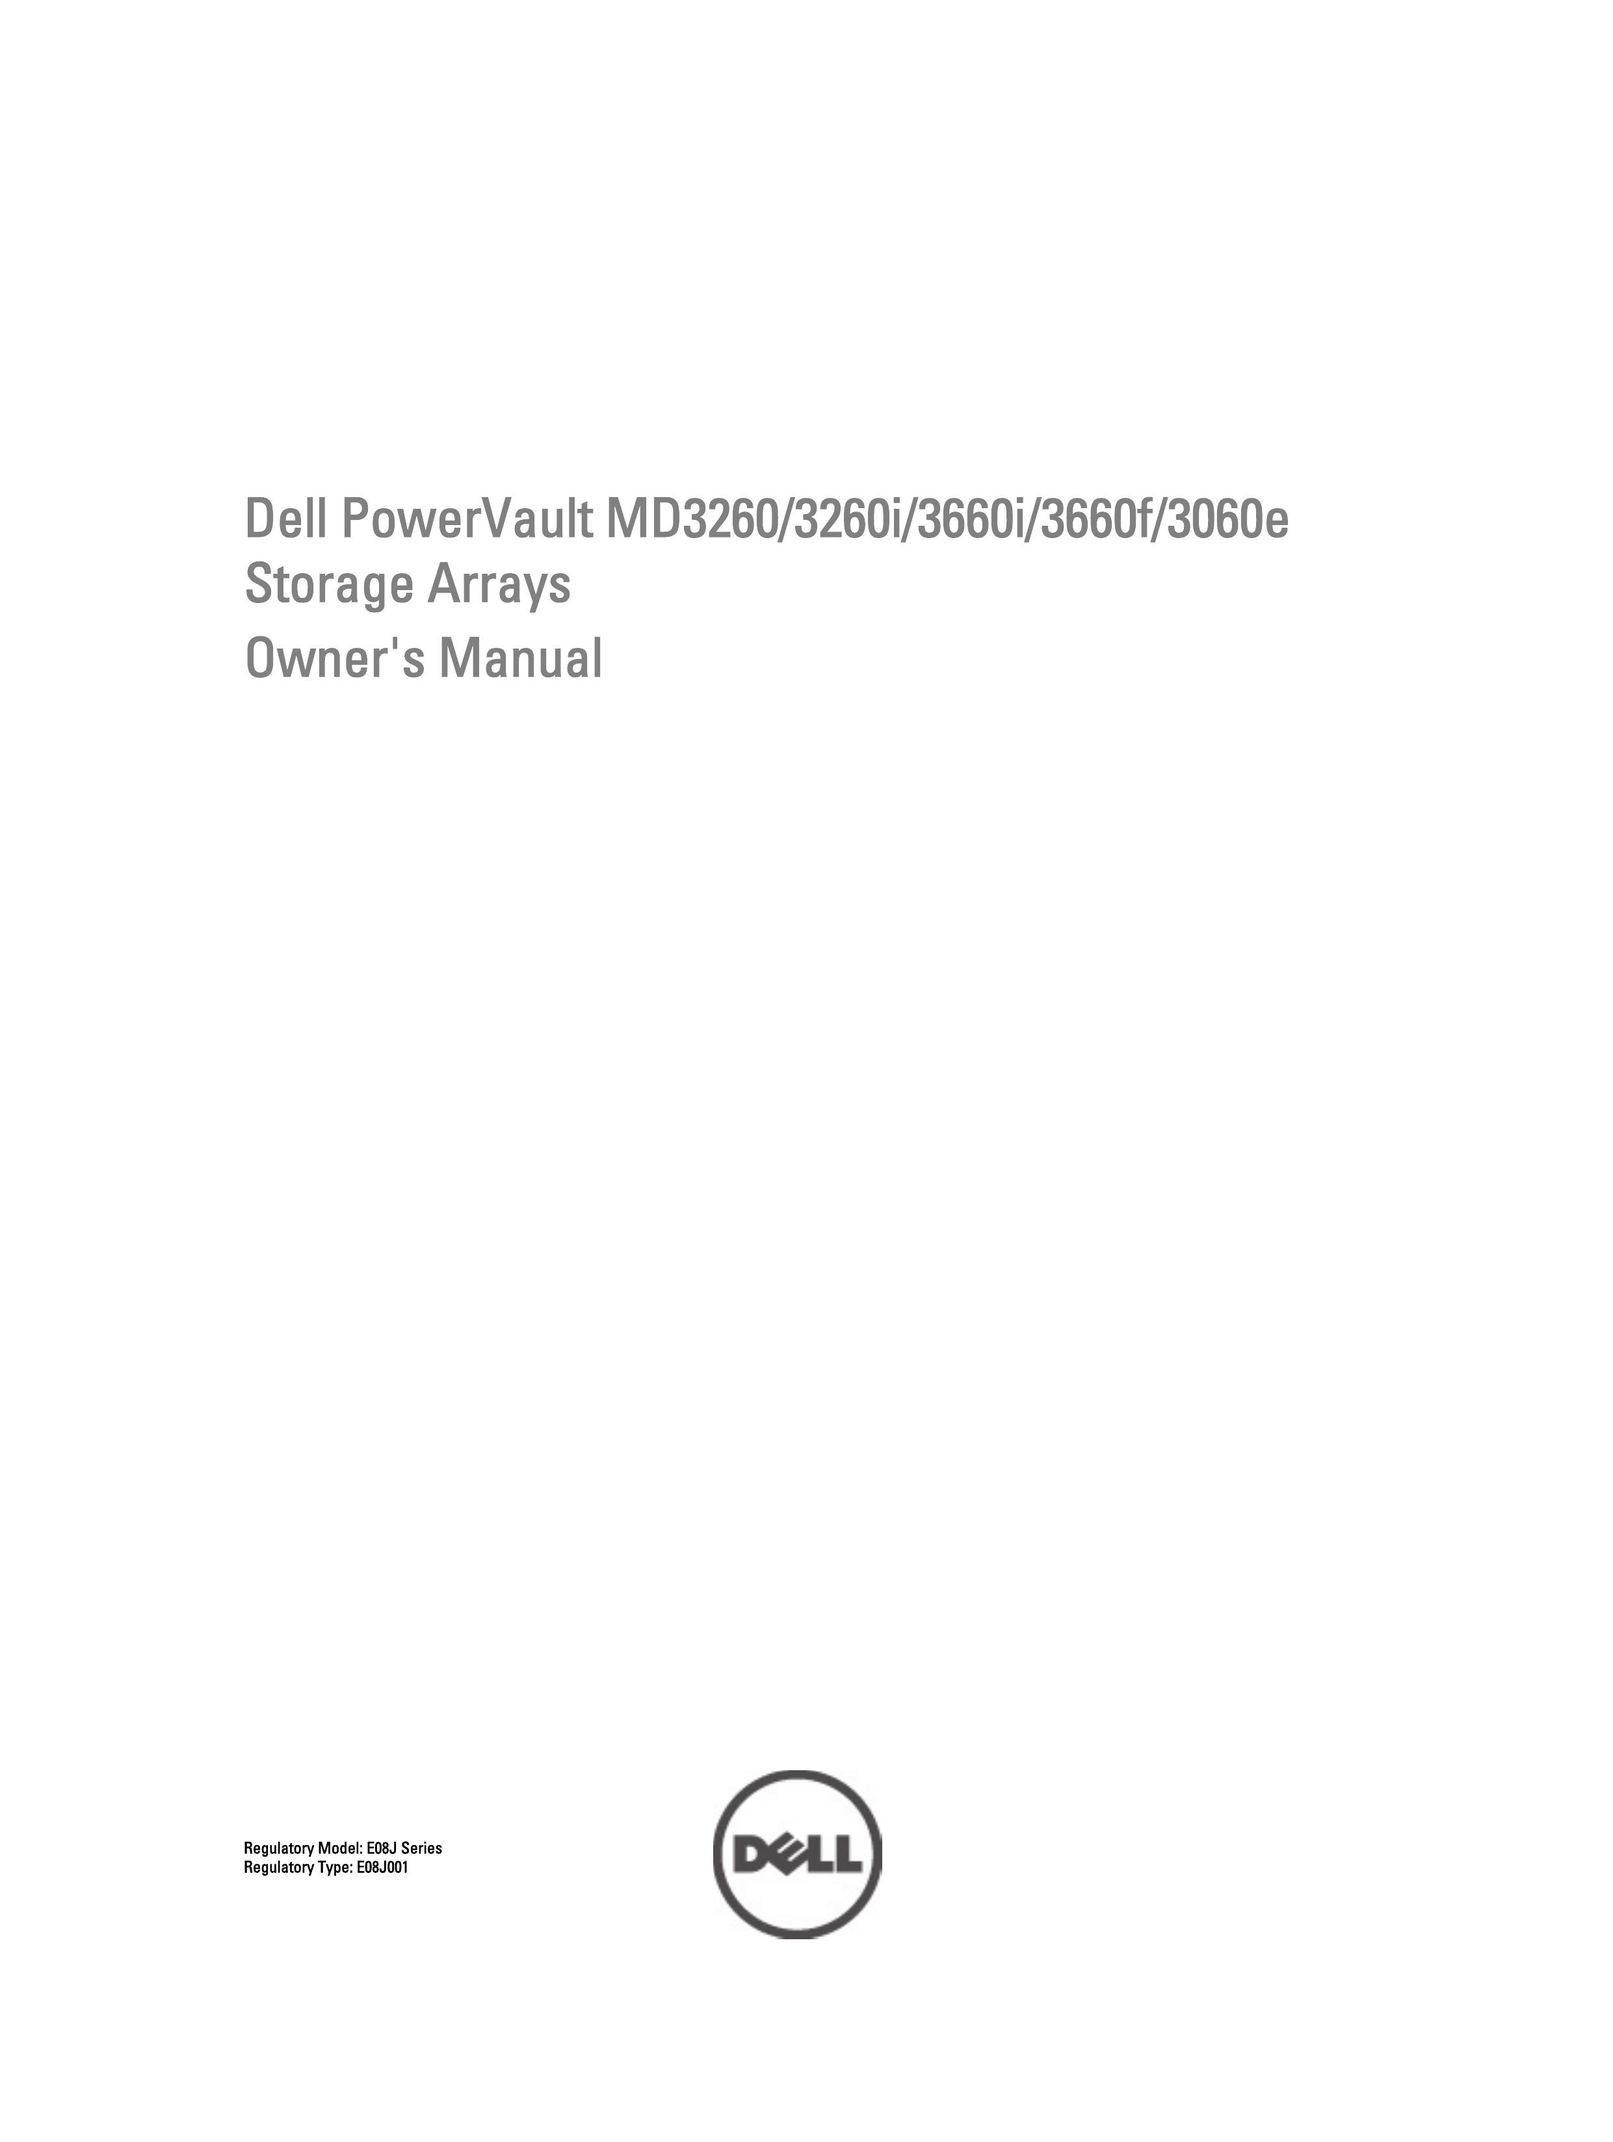 Dell MD3660f Tool Storage User Manual